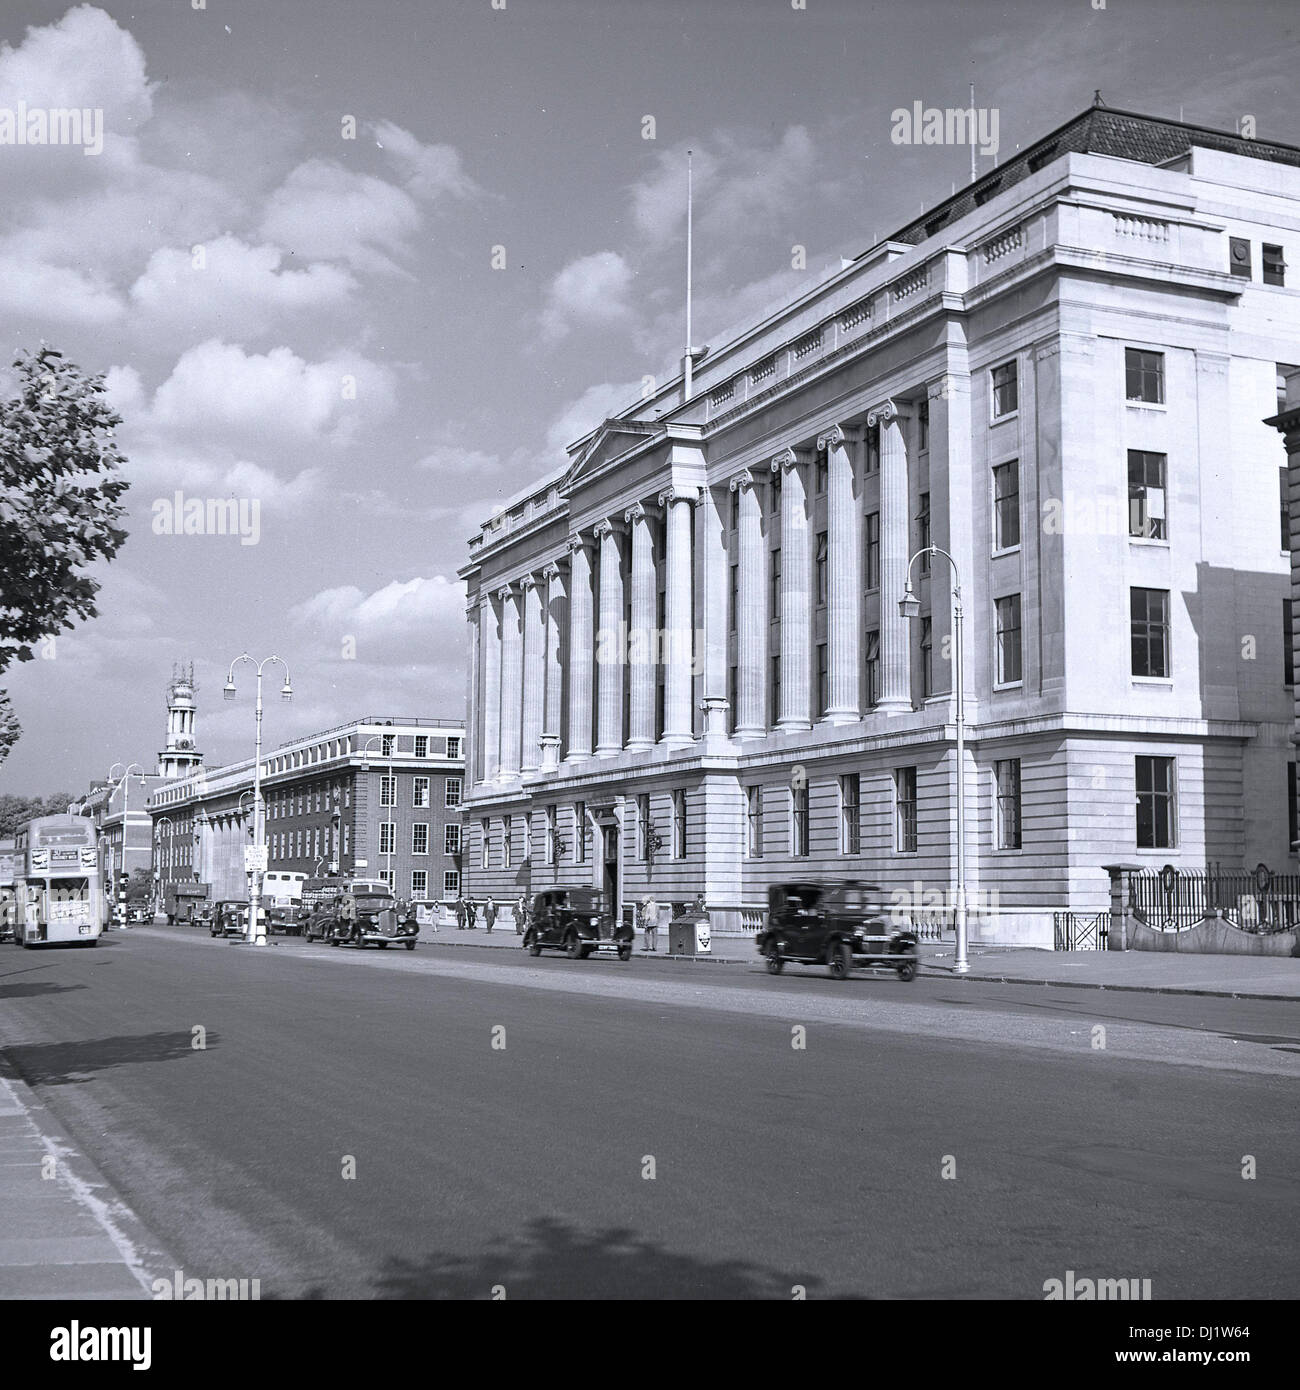 Historical picture, 1950s showing traffic going pass the grand exterior of the Wellcome Building on Euston Rd, London, England. Stock Photo